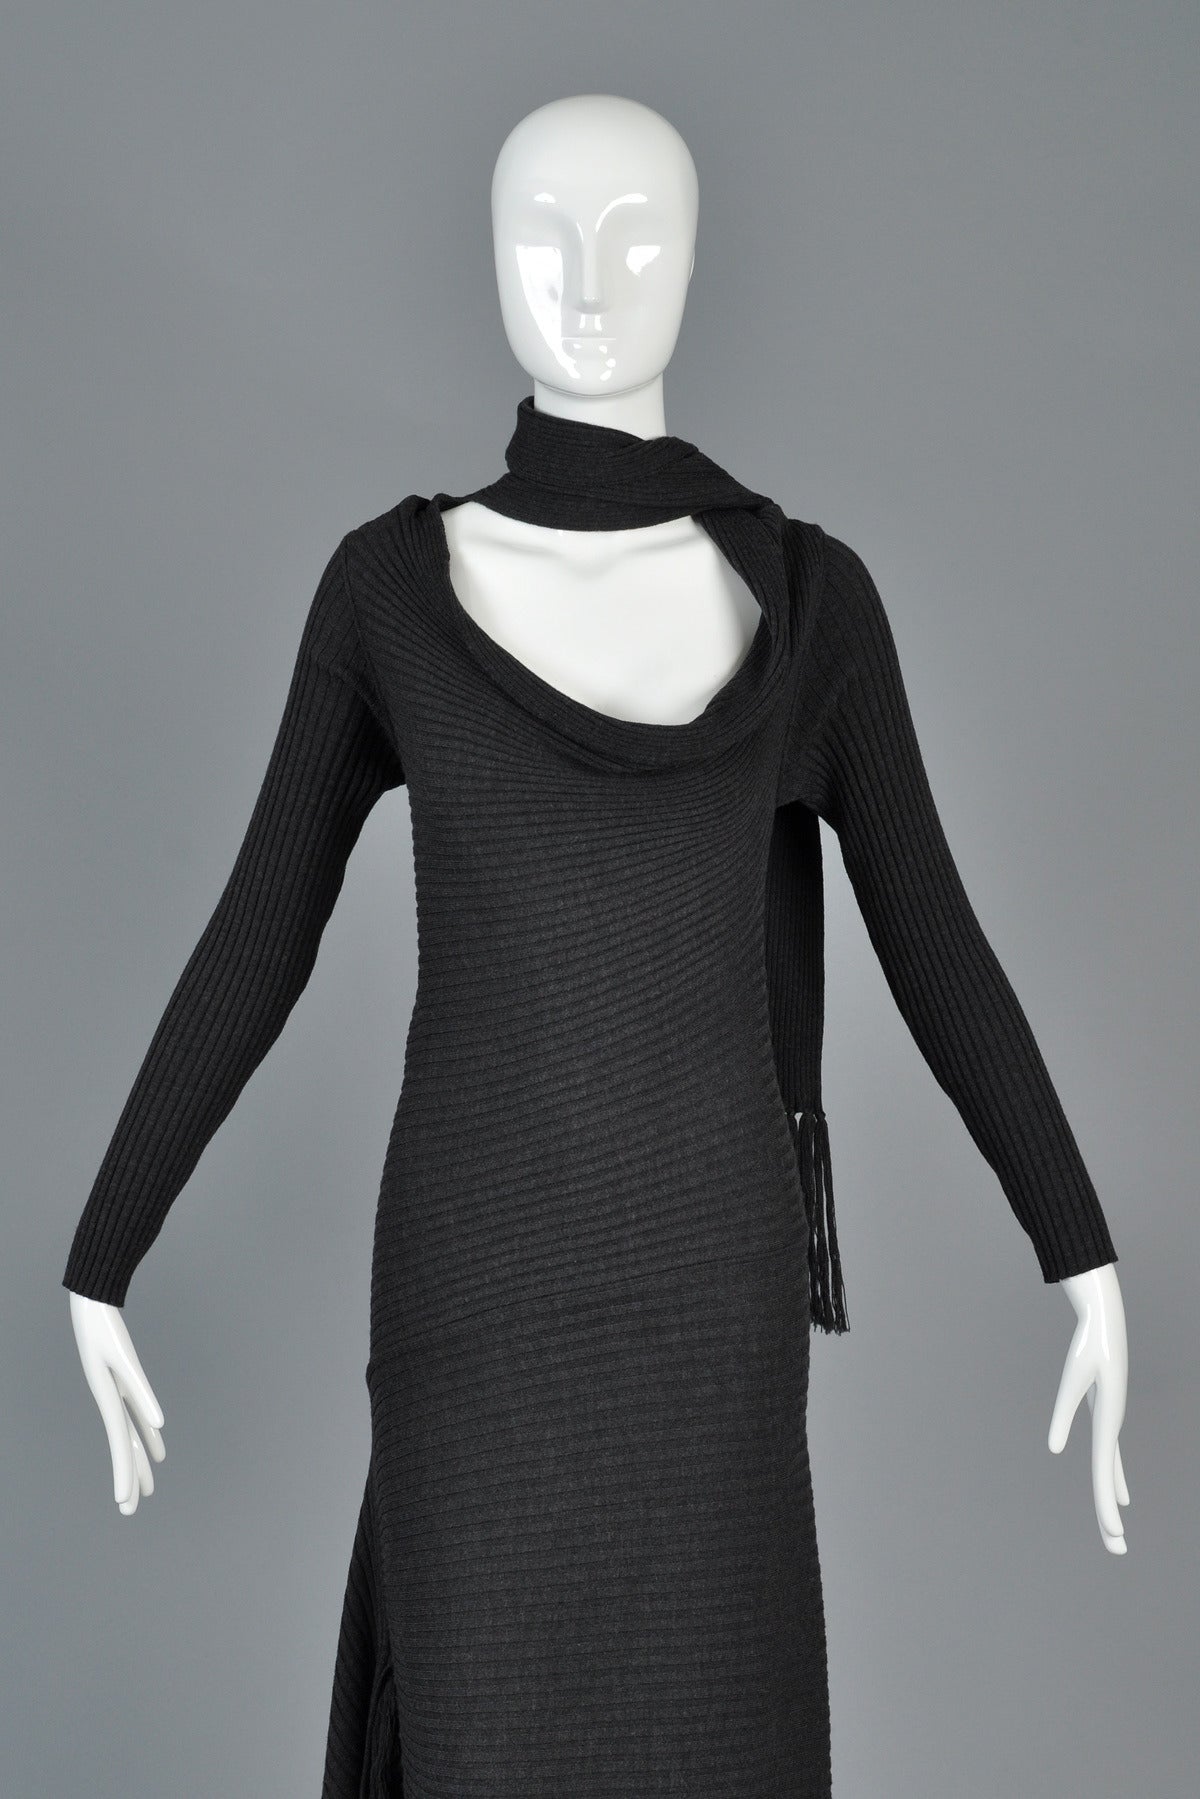 Iconic Jean Paul Gaultier Charcoal Knit Scarf Dress at 1stdibs